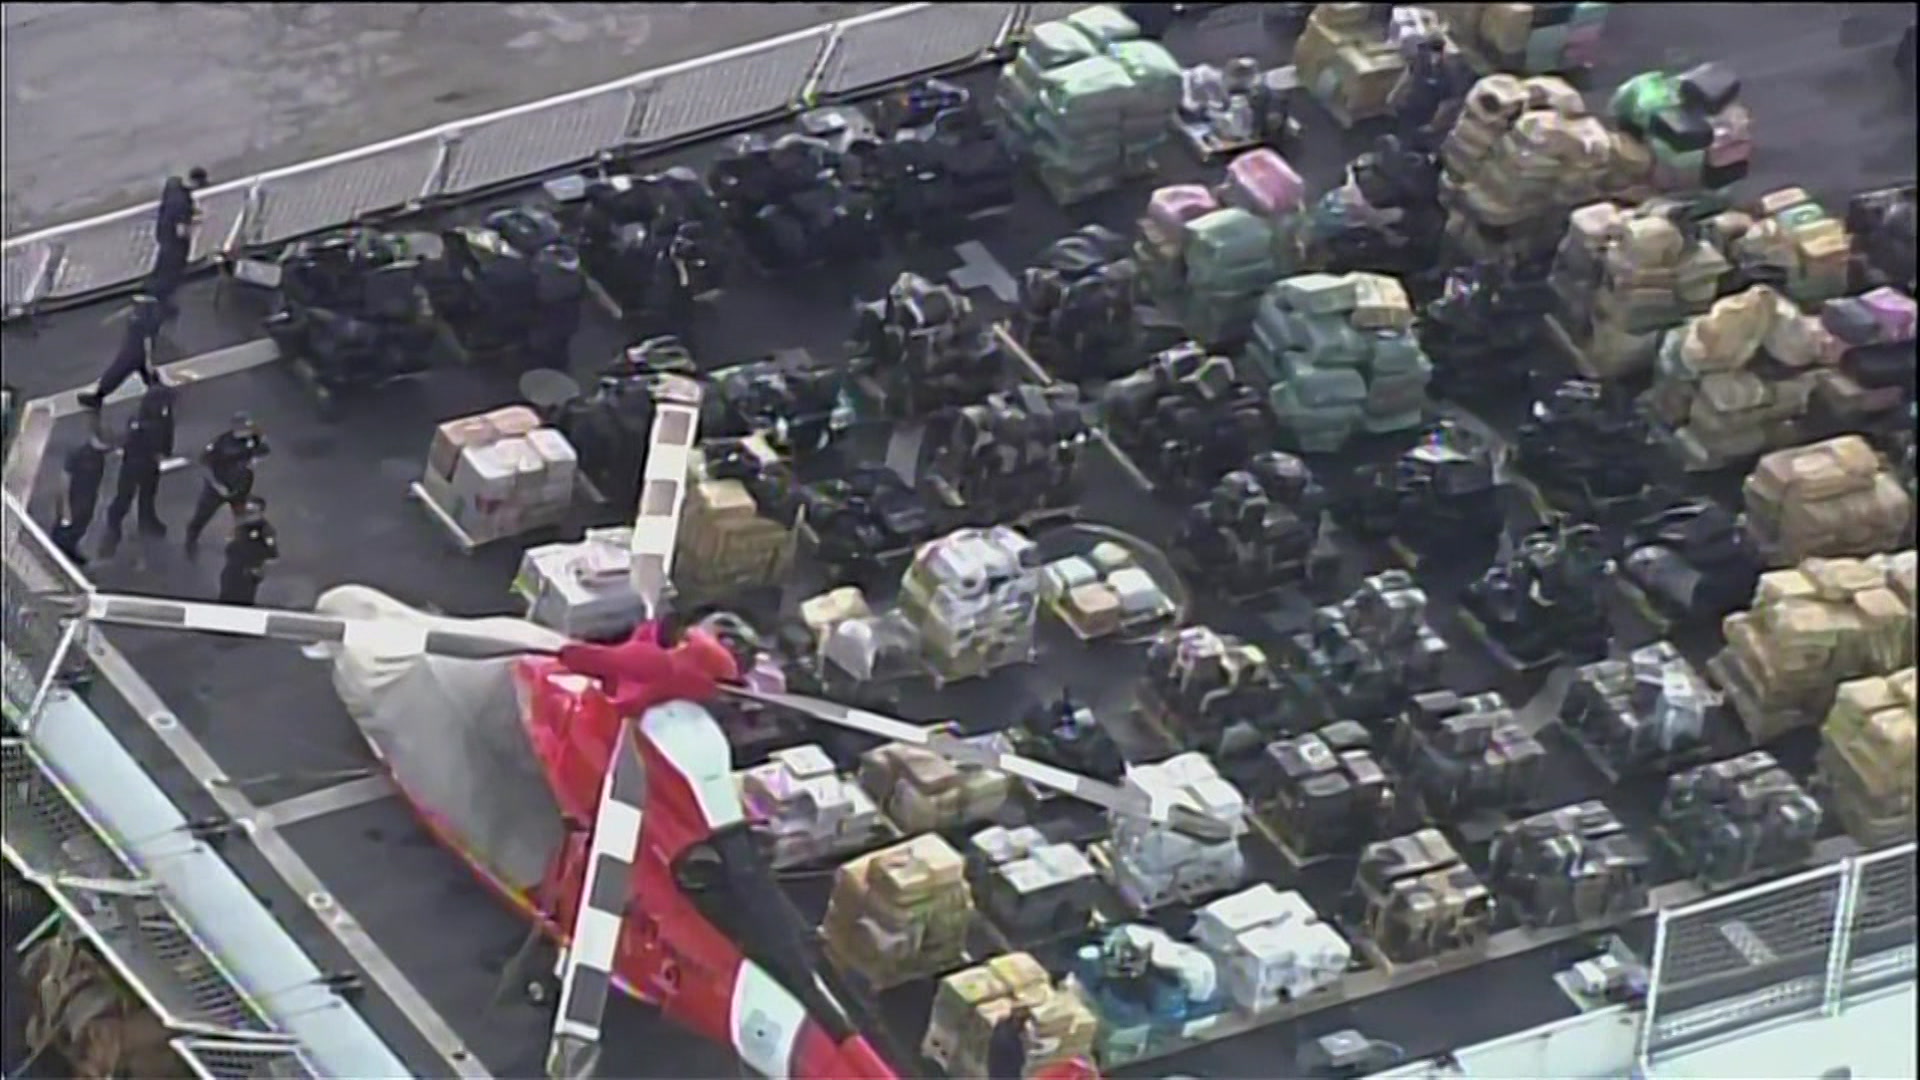 Coast Guard Offloads More Than A Billion Dollars Worth Of Seized Drugs At Port Everglades